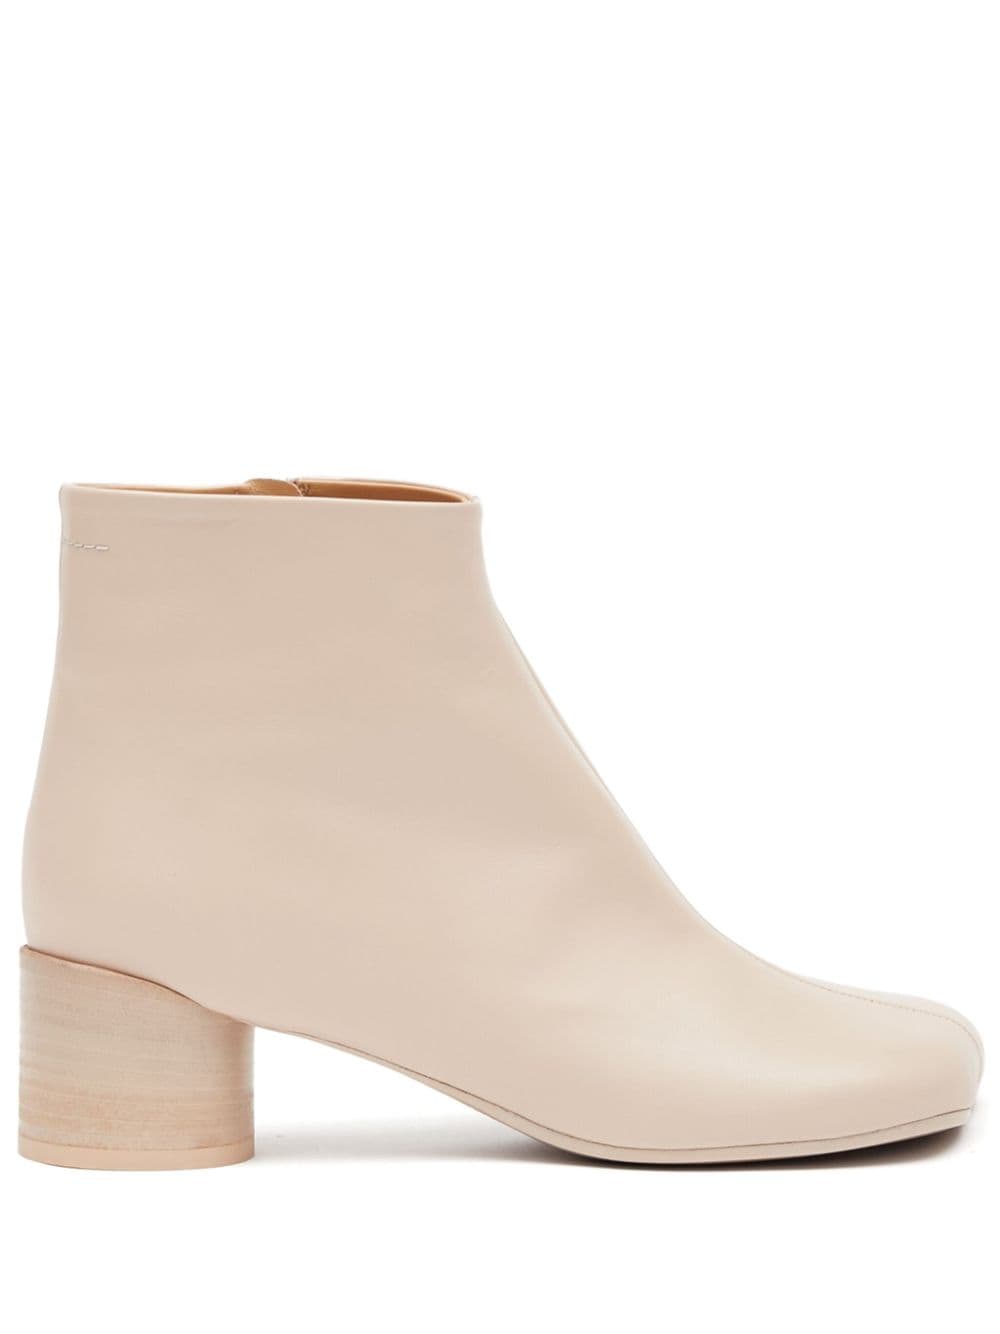 Mm6 Maison Margiela Anatomic 45mm Ankle Boots In Nude